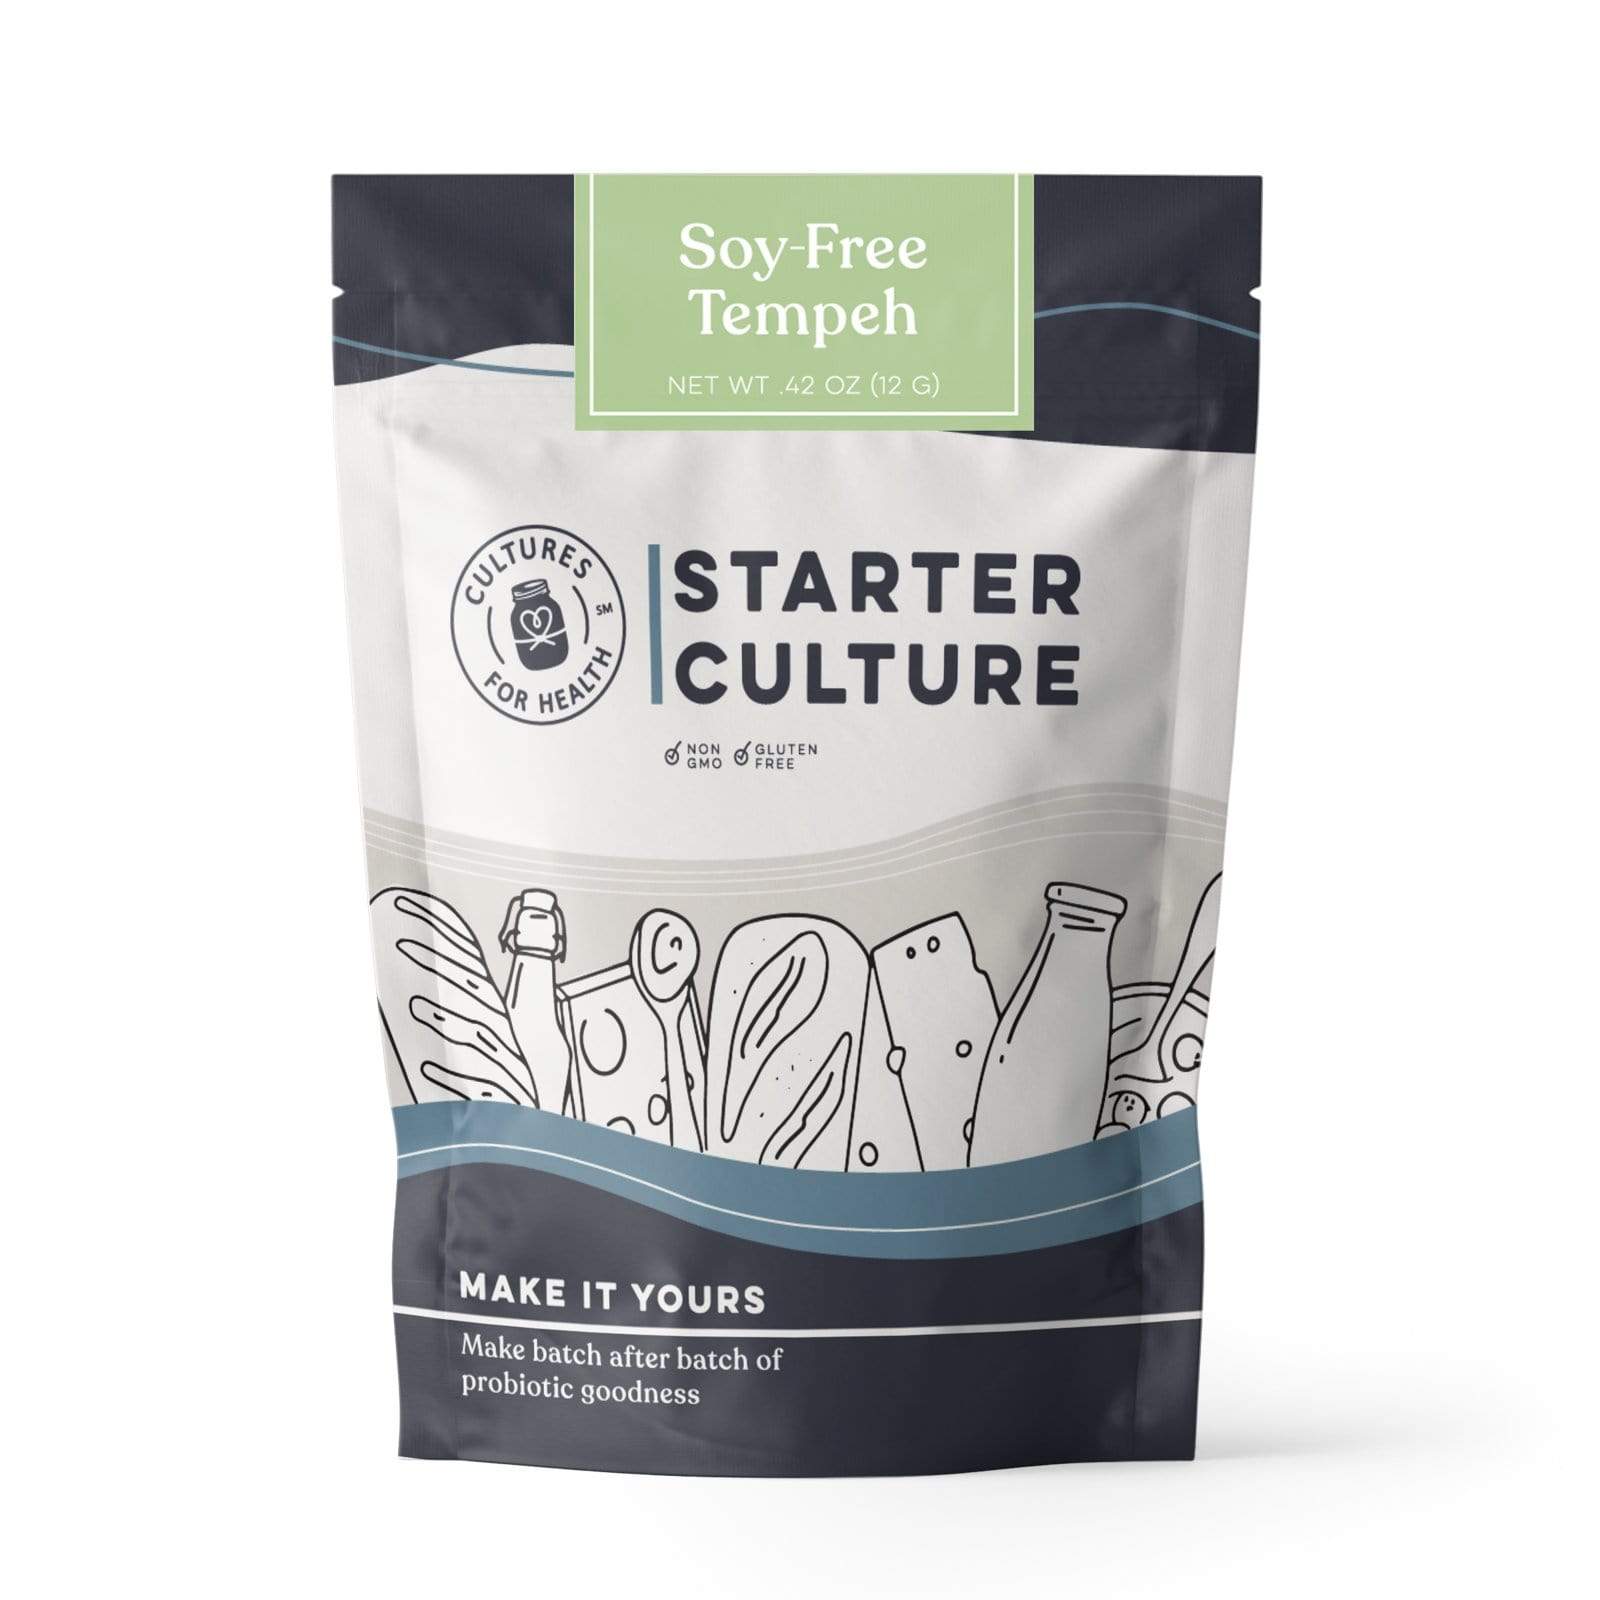 Tempeh & Soy Soy-Free Tempeh Starter Culture